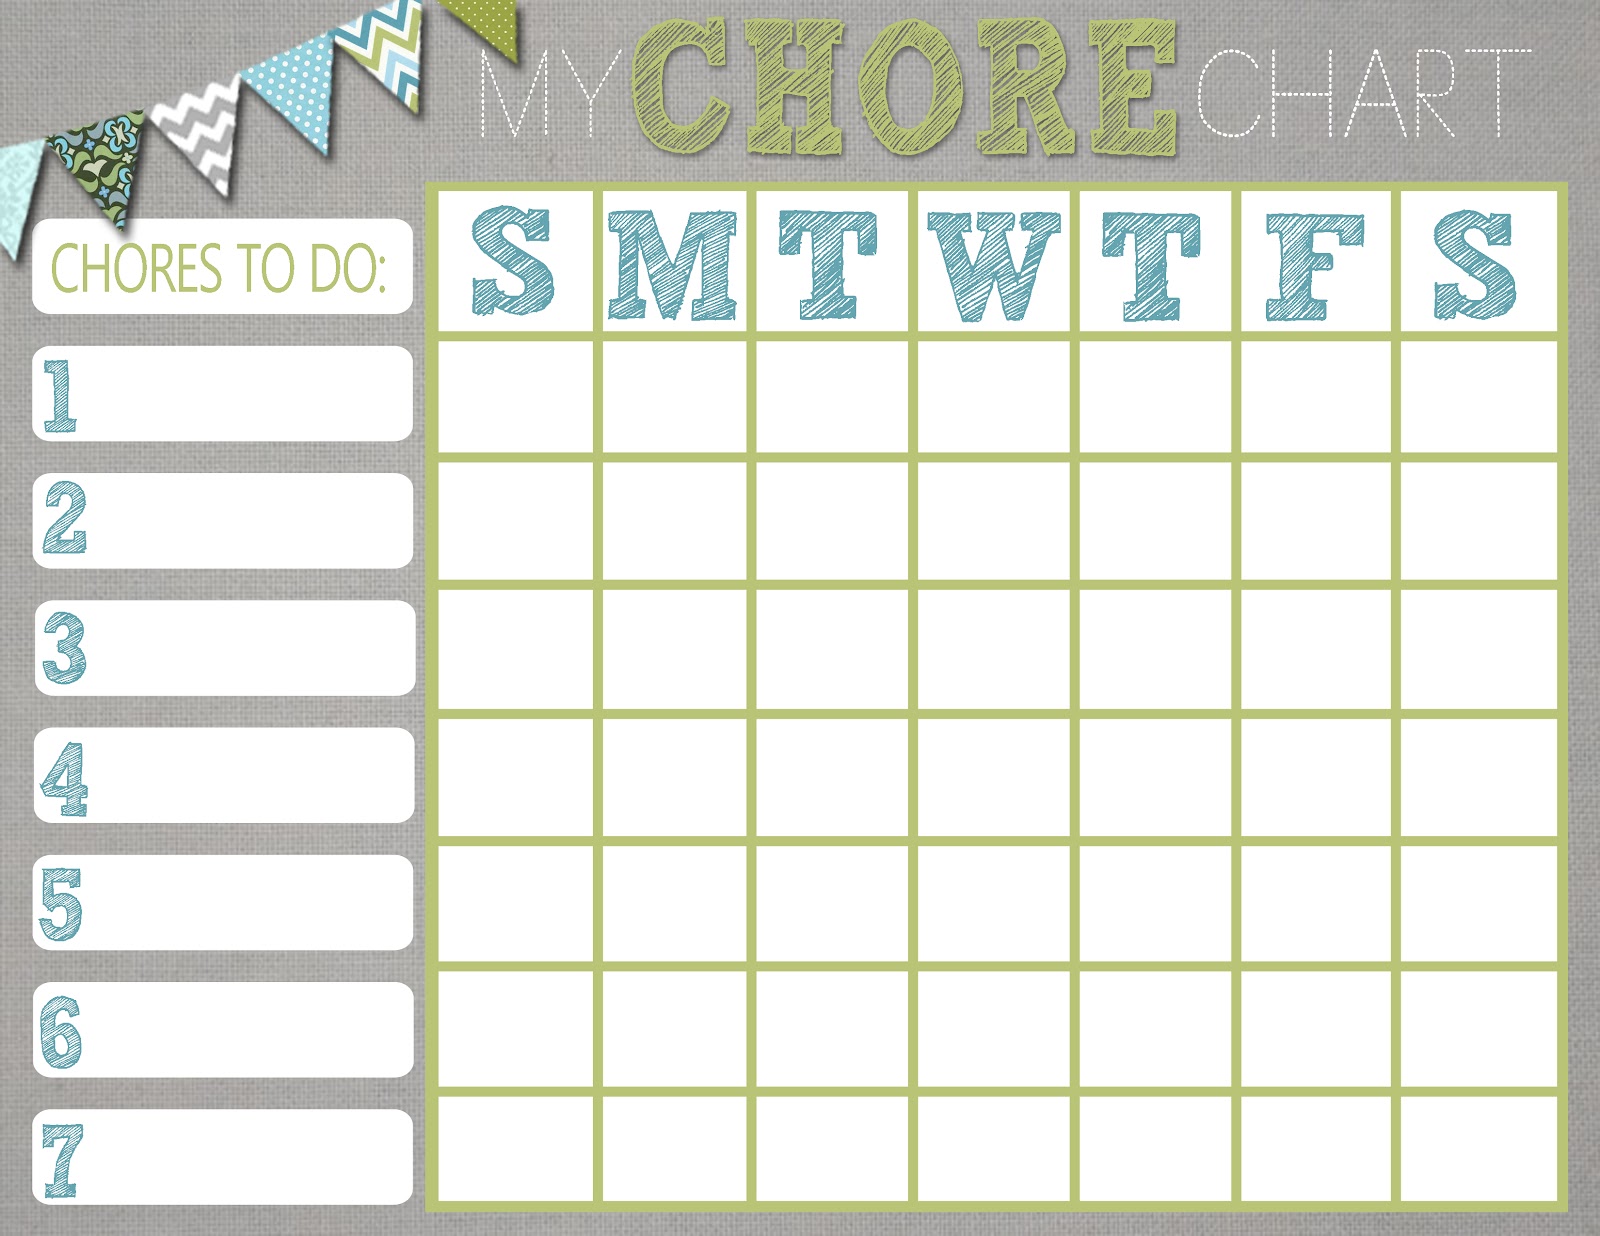 Make Your Own Chore Chart